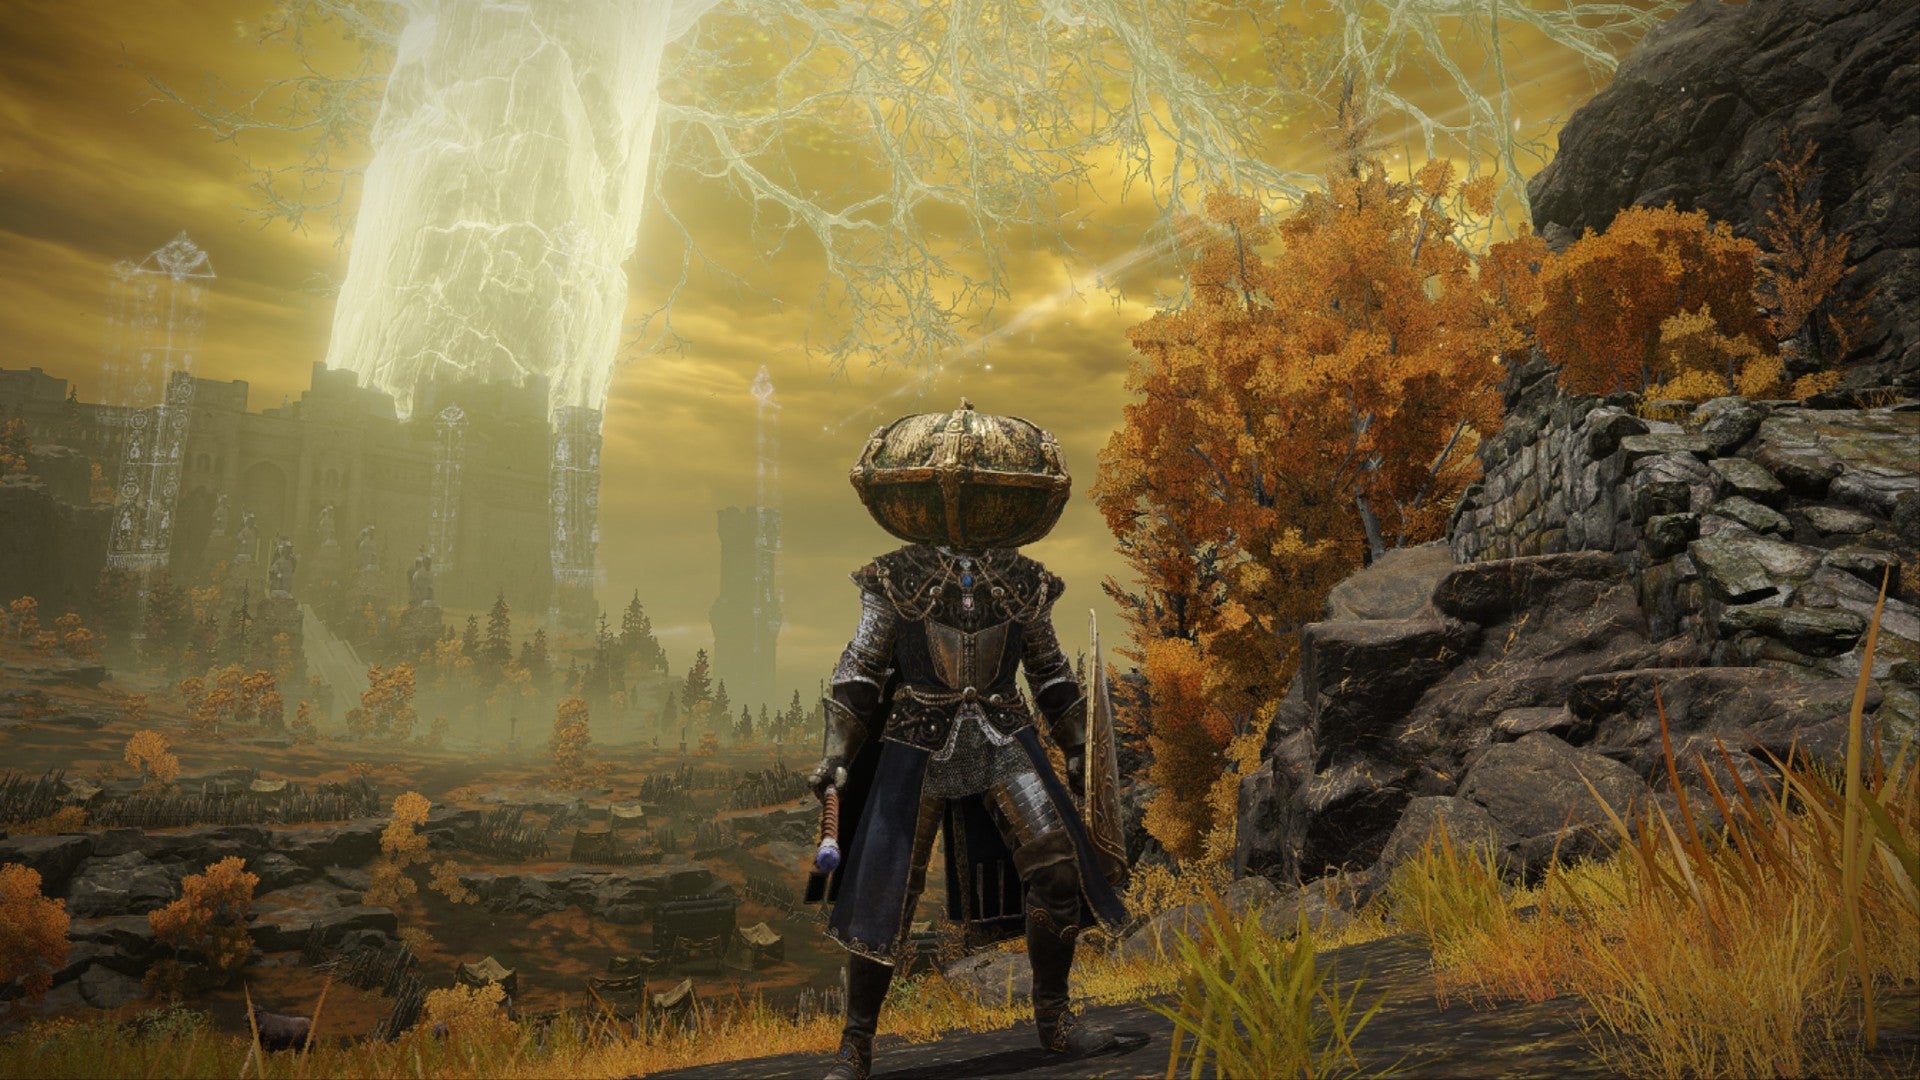 Elden Ring player sporting a Pumpkin Helm and knight armor on the Erdtree-Gazing Hill